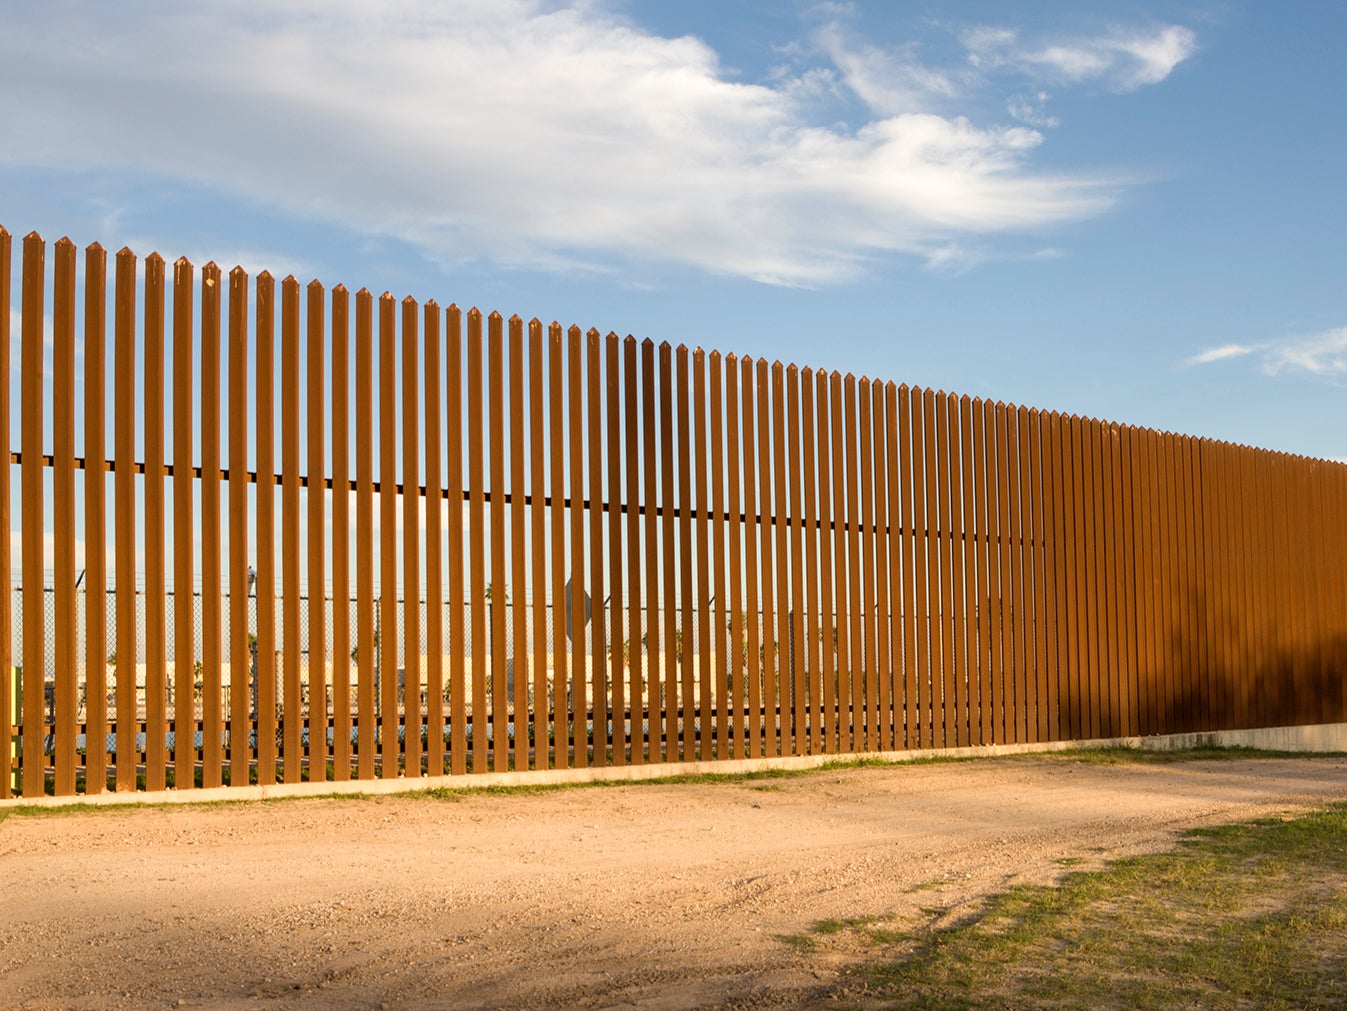 The border wall with Mexico was the starting point of the photographer’s road trip&nbsp;